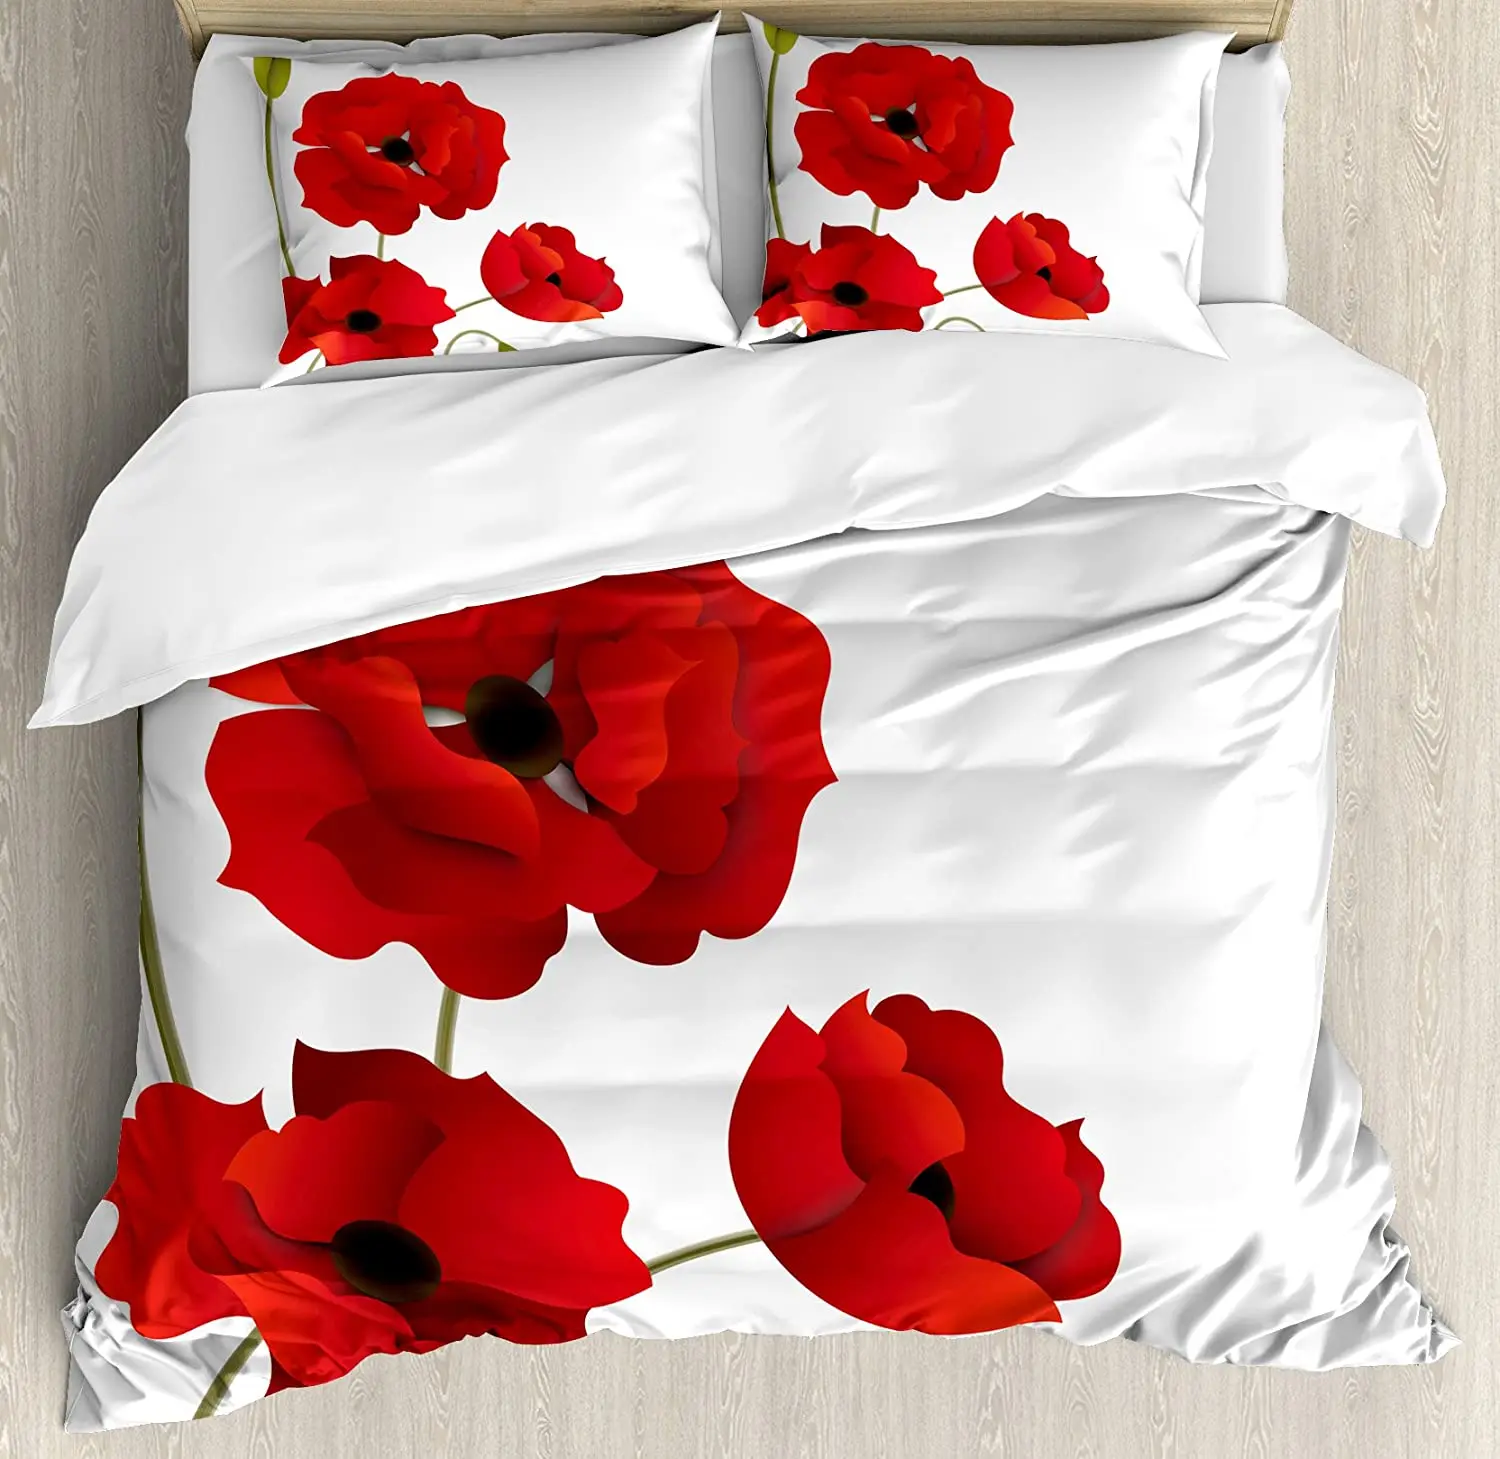 

Floral Bedding Set For Bedroom Bed Home Poppy Flowers Vivid Petals with Buds Pastoral Puri Duvet Cover Quilt Cover Pillowcase